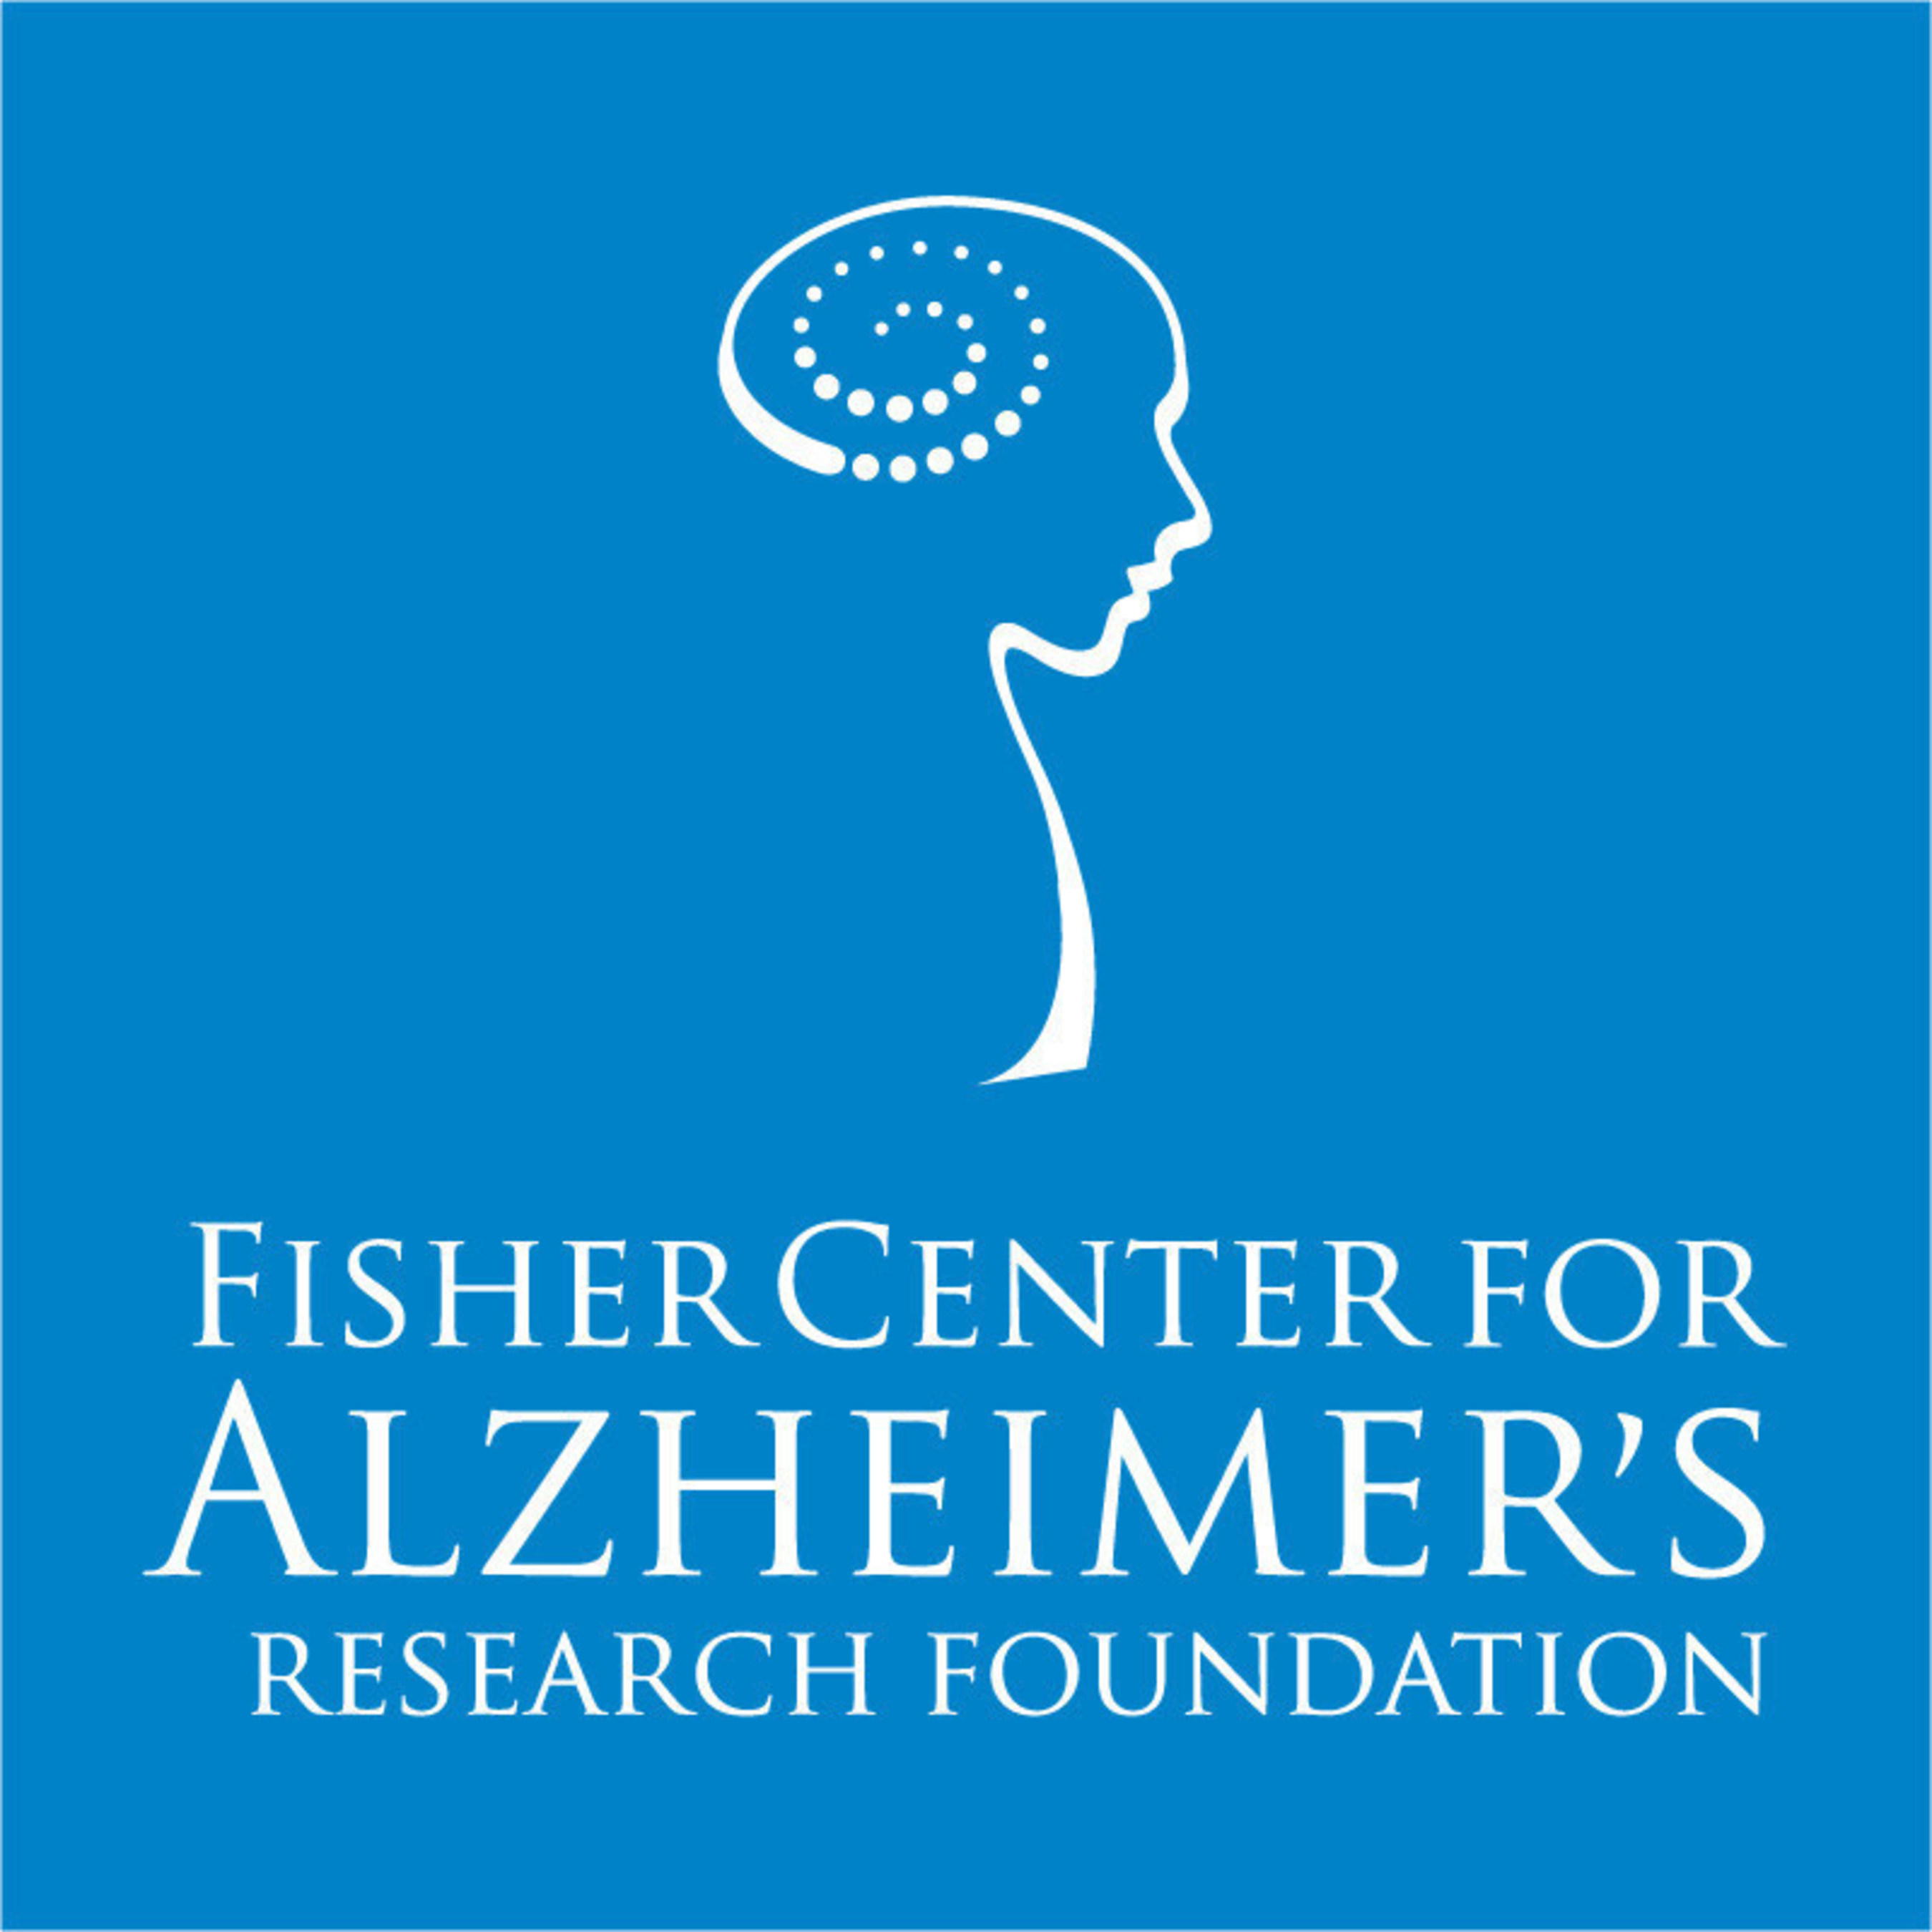 Fisher Center for Alzheimer's Research Foundation